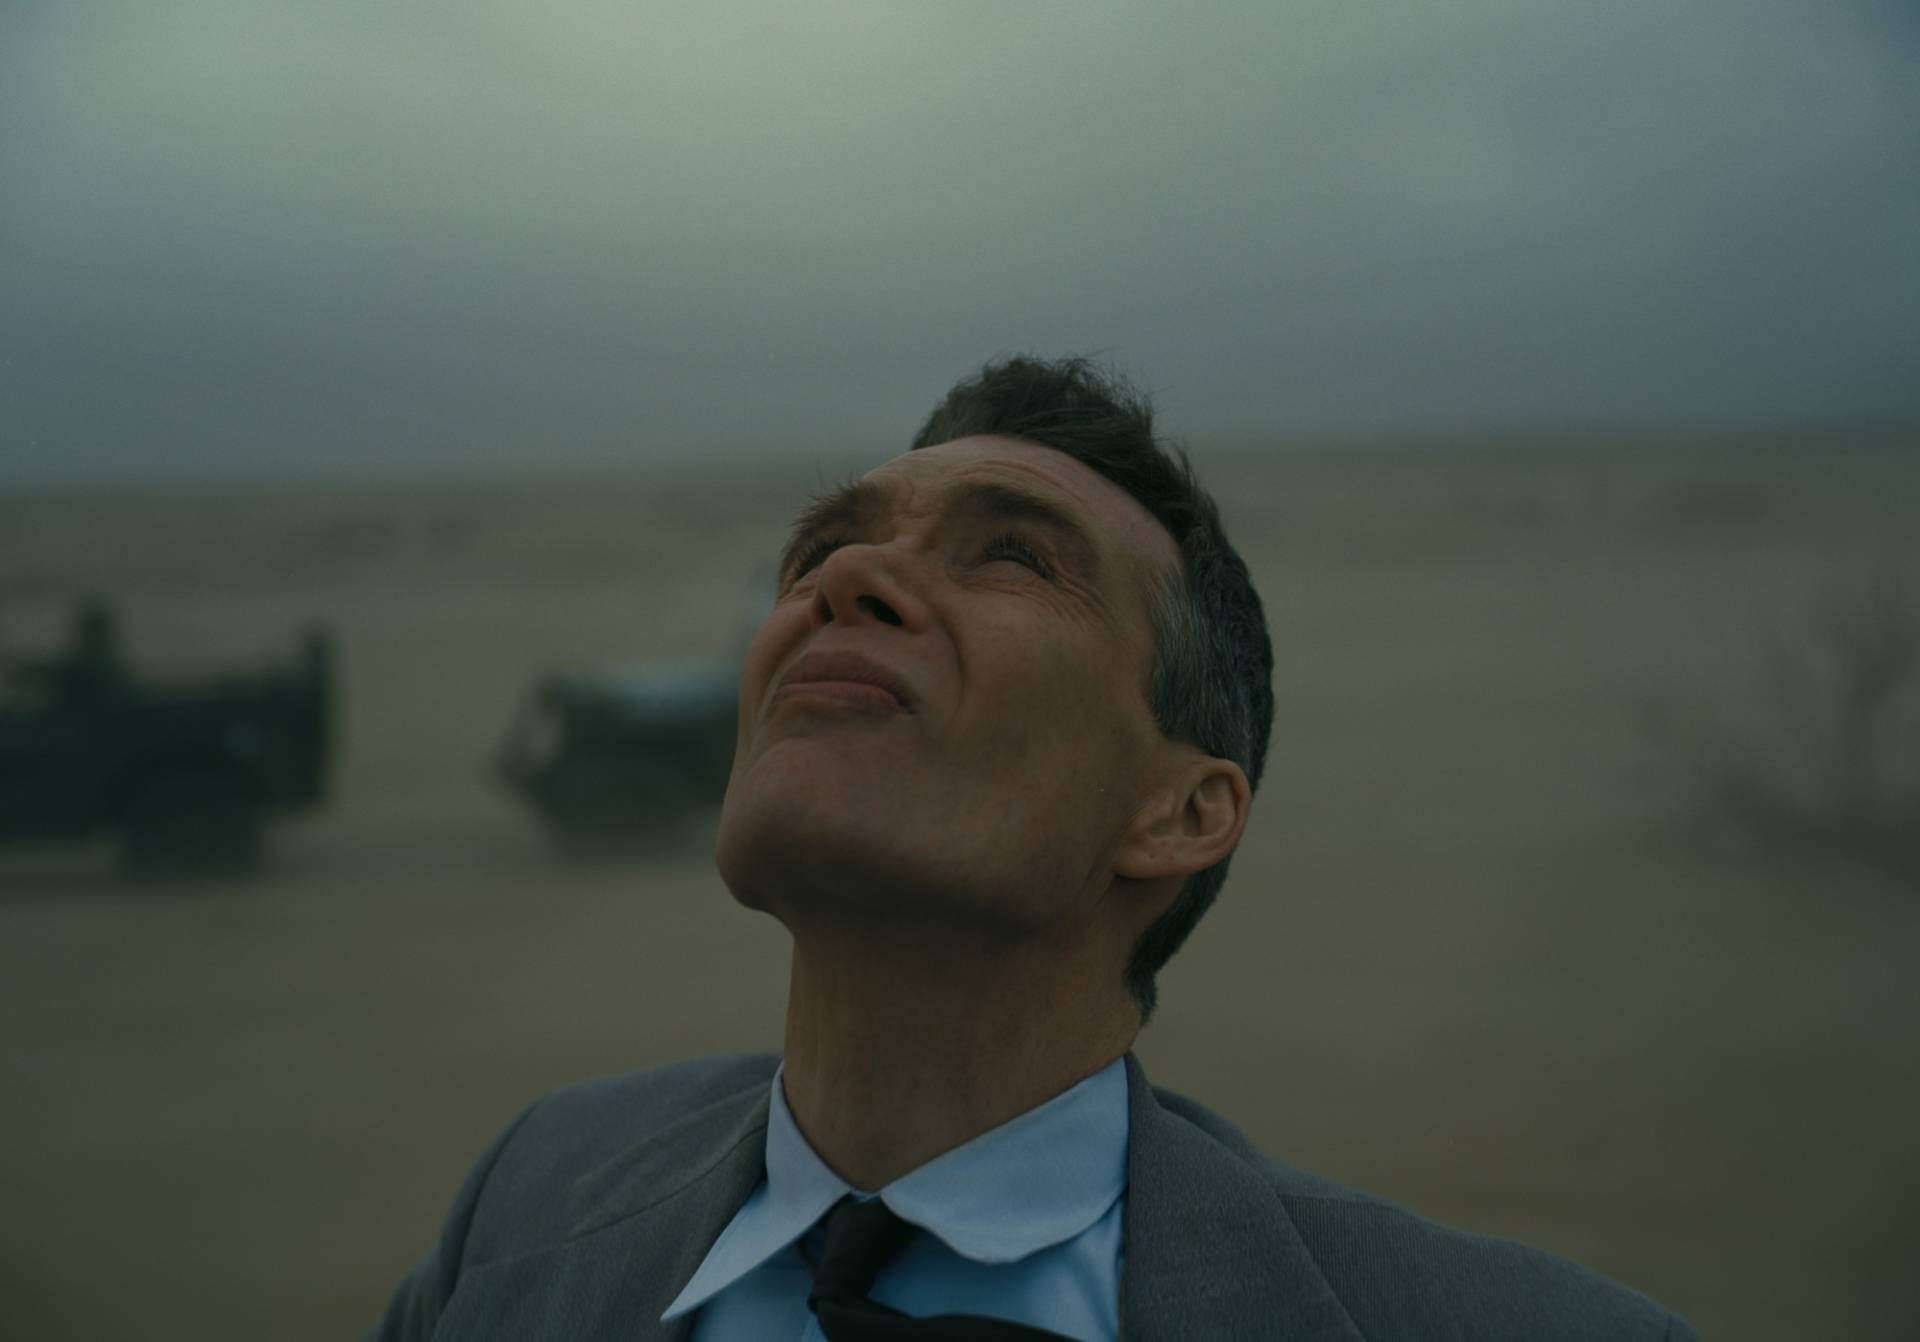 A white man wearing a suit stands in the desert and gazes up at the sky.